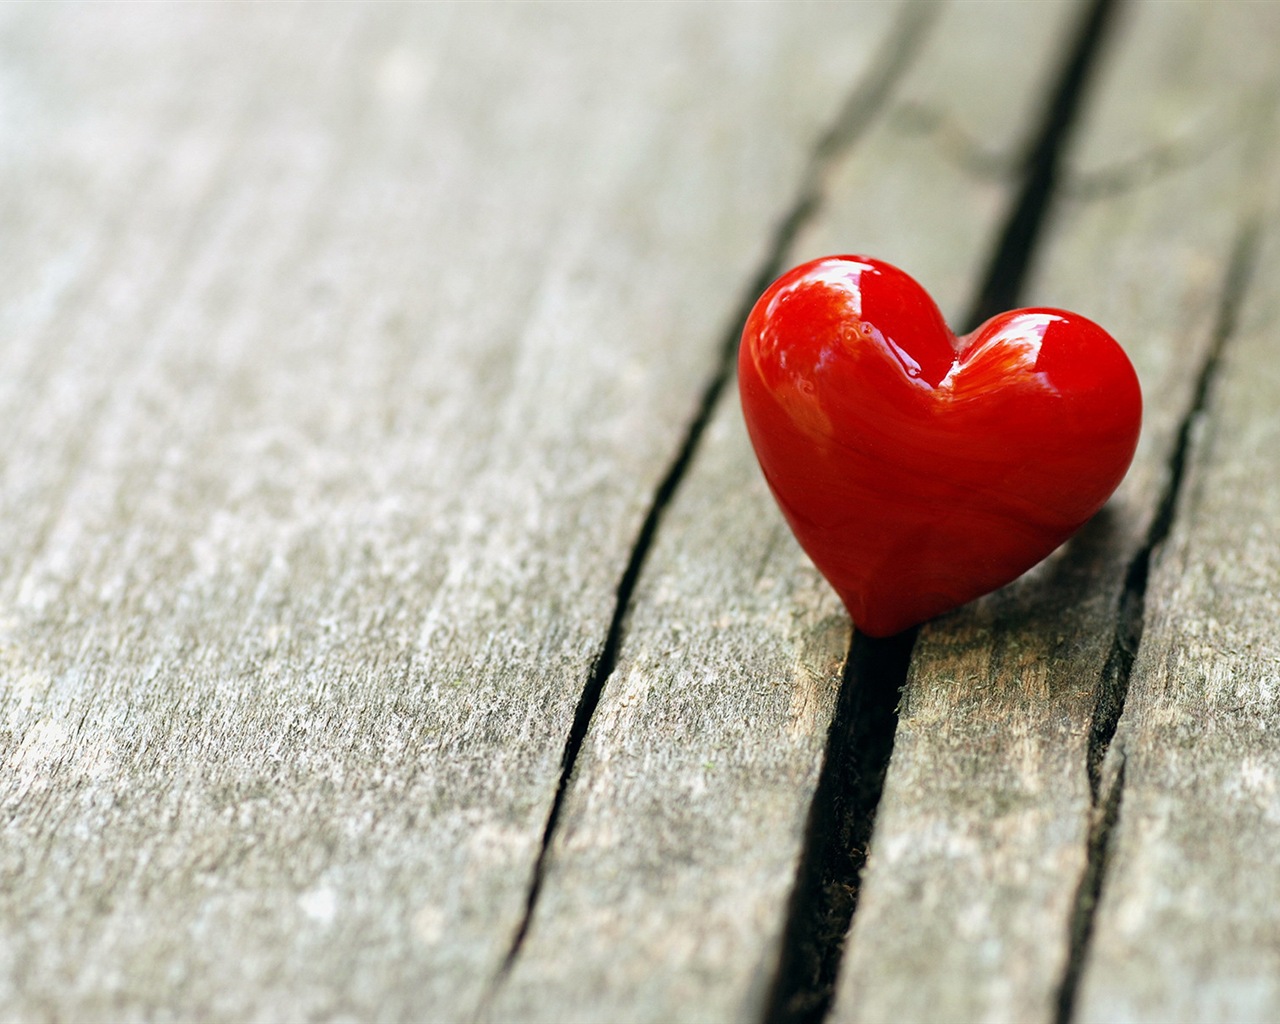 The theme of love, creative heart-shaped HD wallpapers #9 - 1280x1024